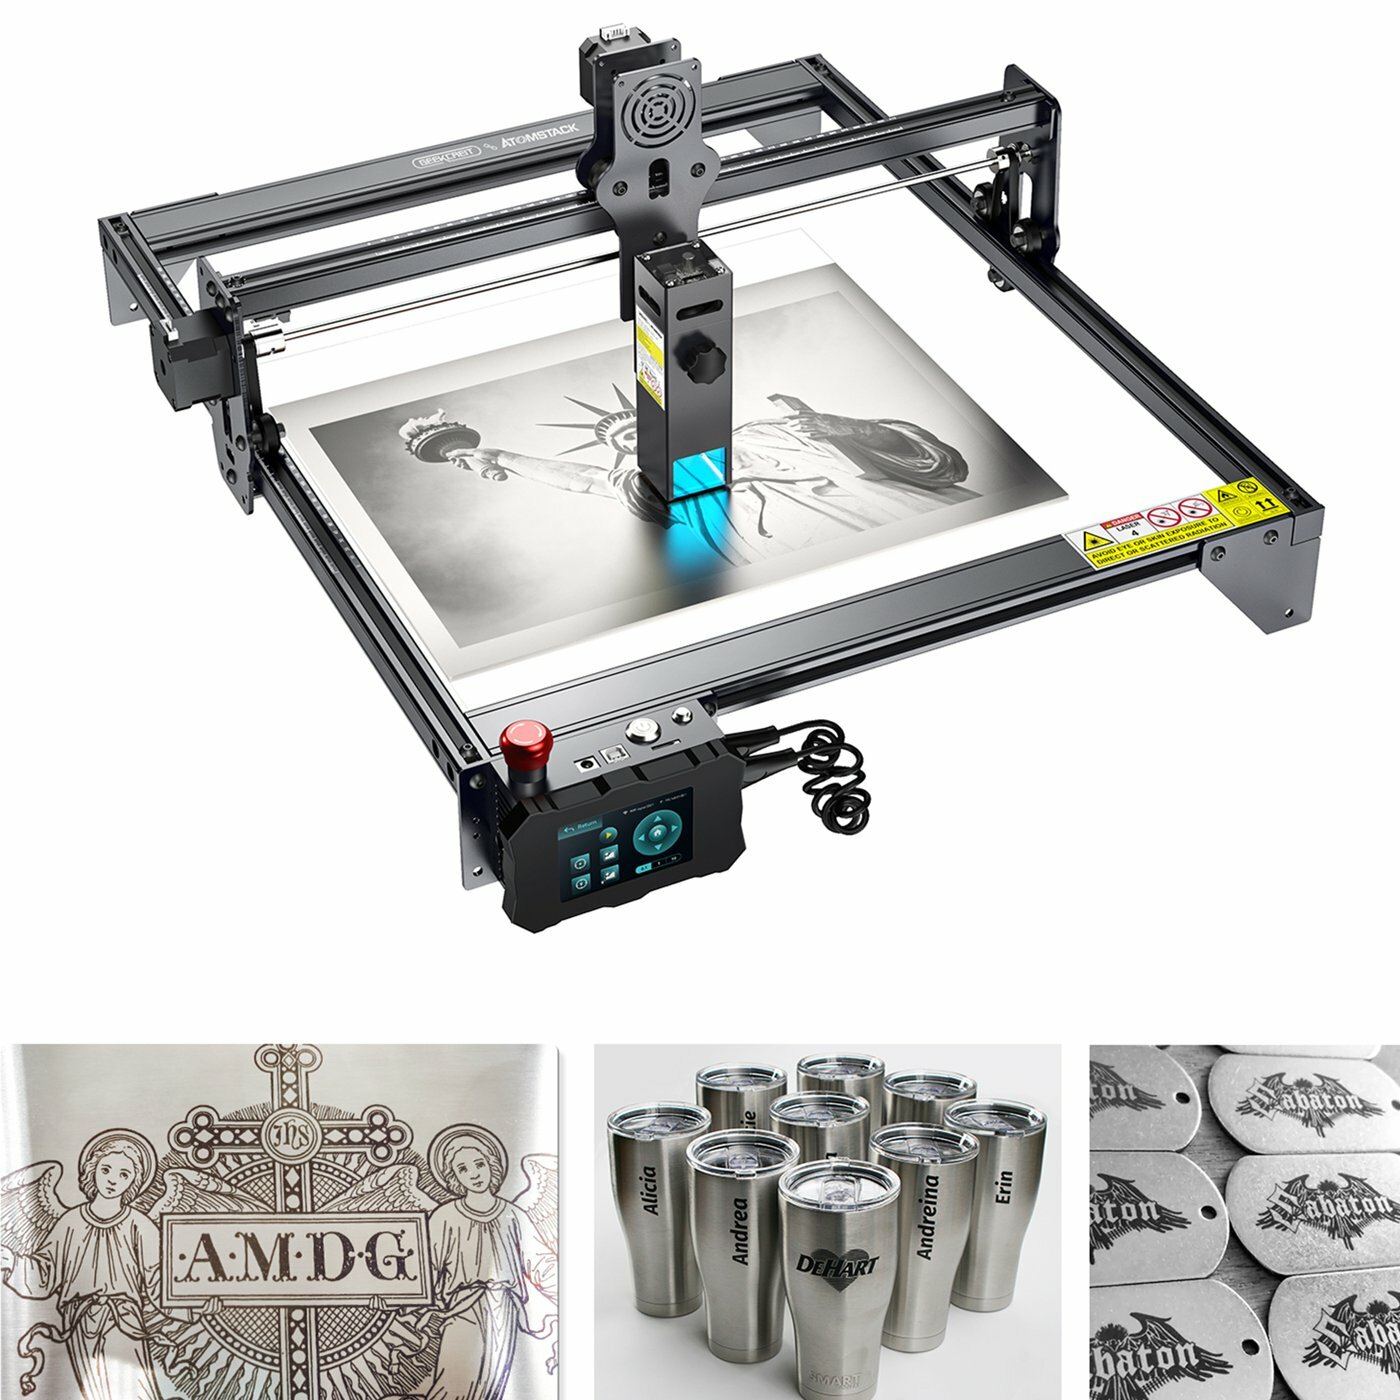 Image of GEEKCREITxATOMSTACK S10 PRO Laser Engraver 10W Output Power Flagship Engraving Cutting Machine Support Offline Engraving